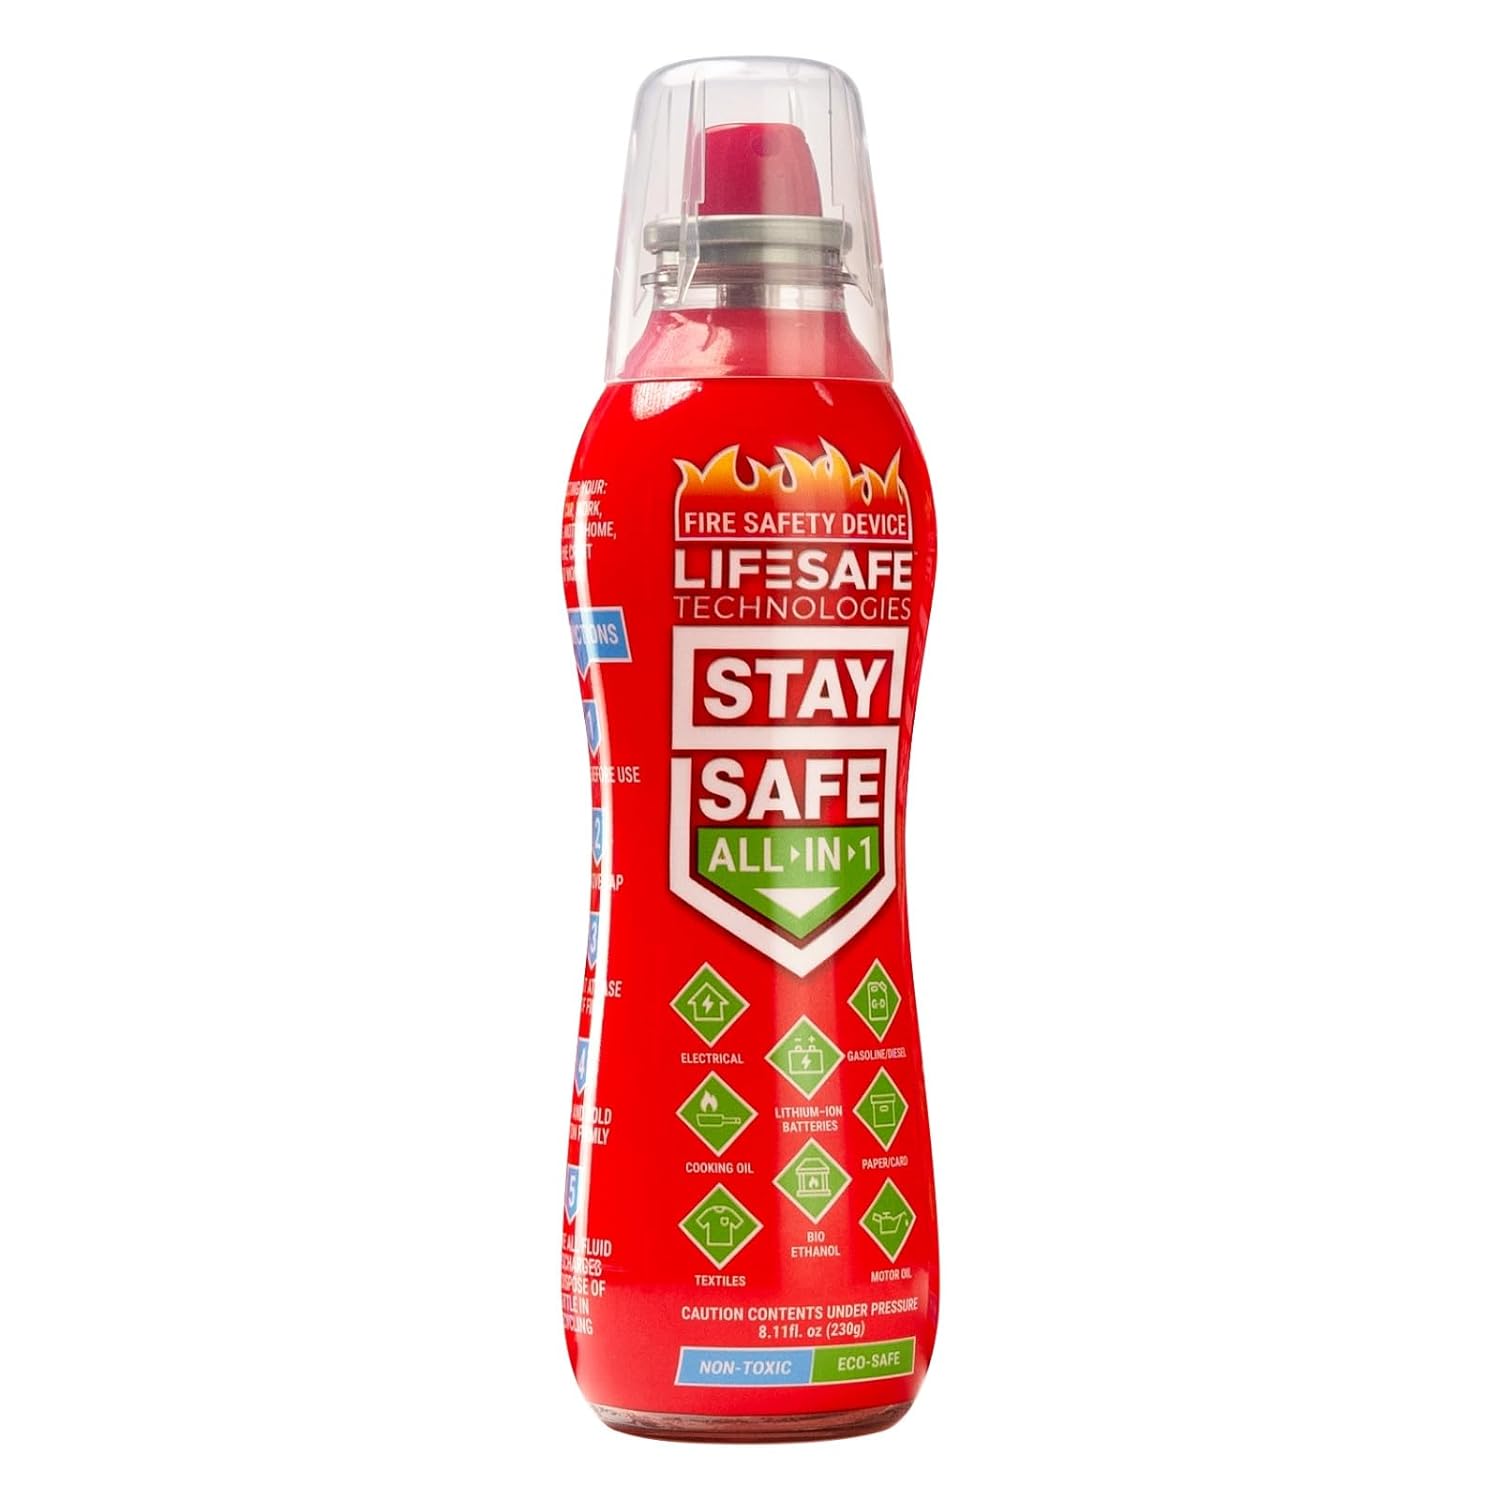 StaySafe - All-in-1 Fire Extinguisher